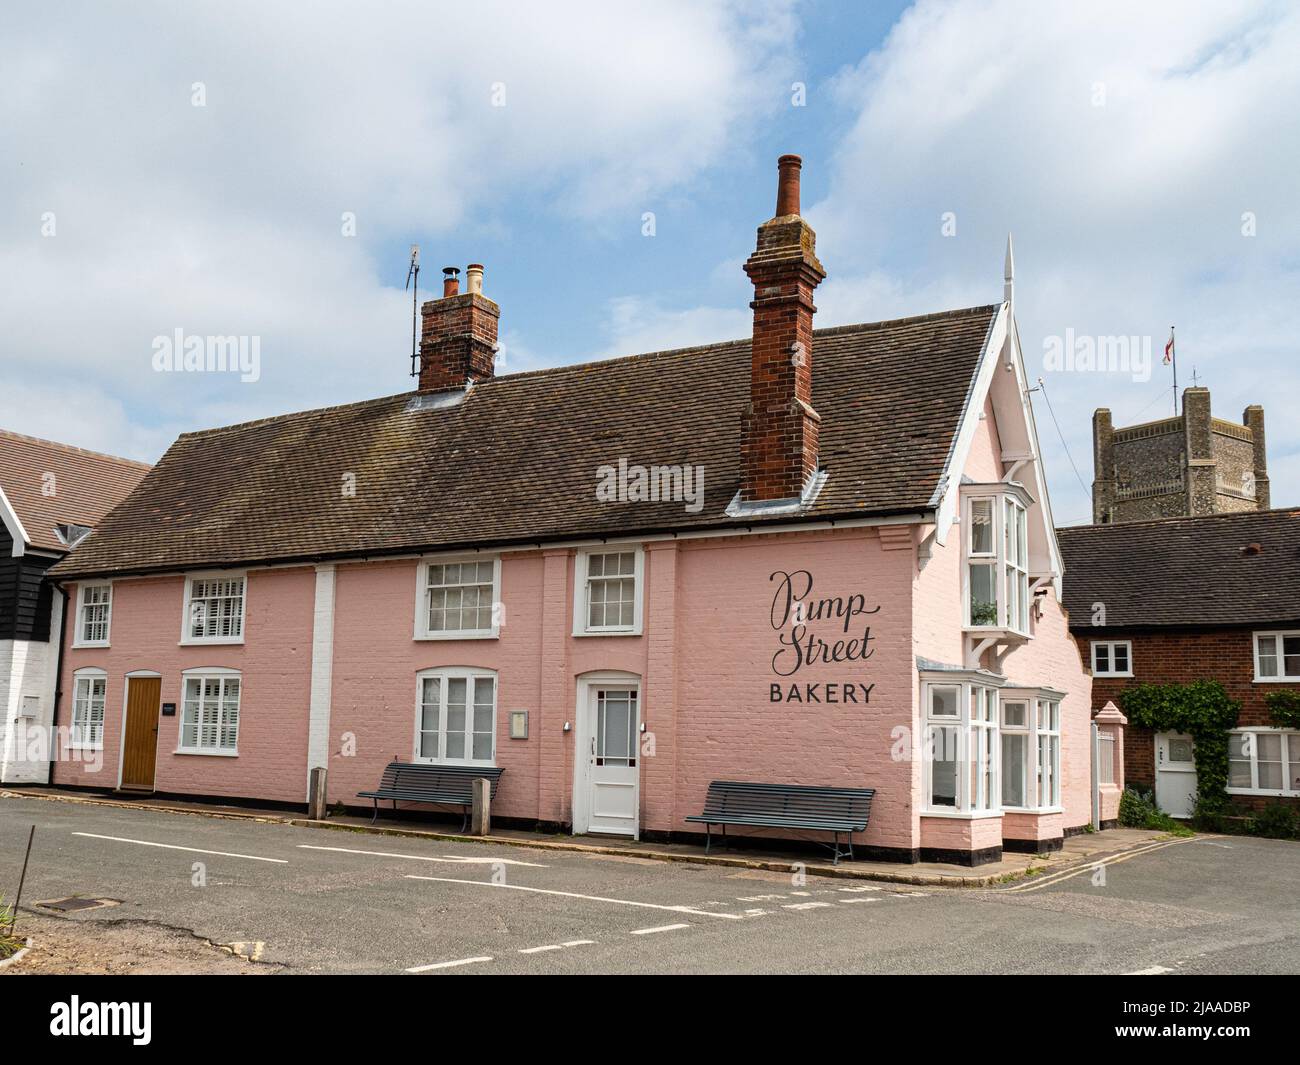 The distinctive pink exterior of the Pump Street bakery in Orford Suffolk Stock Photo